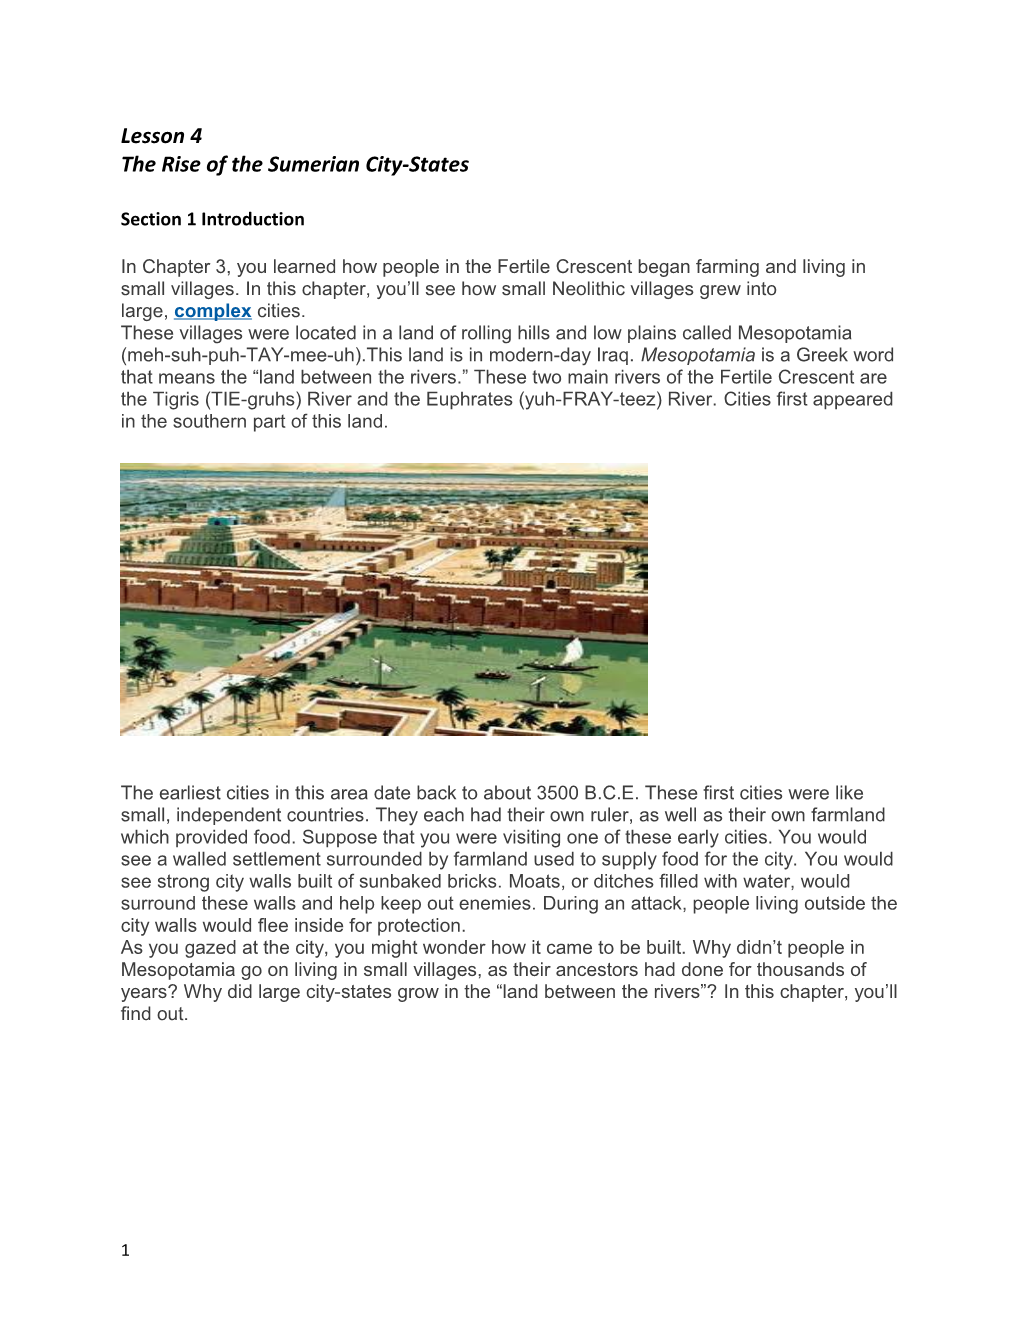 The Rise of the Sumerian City-States